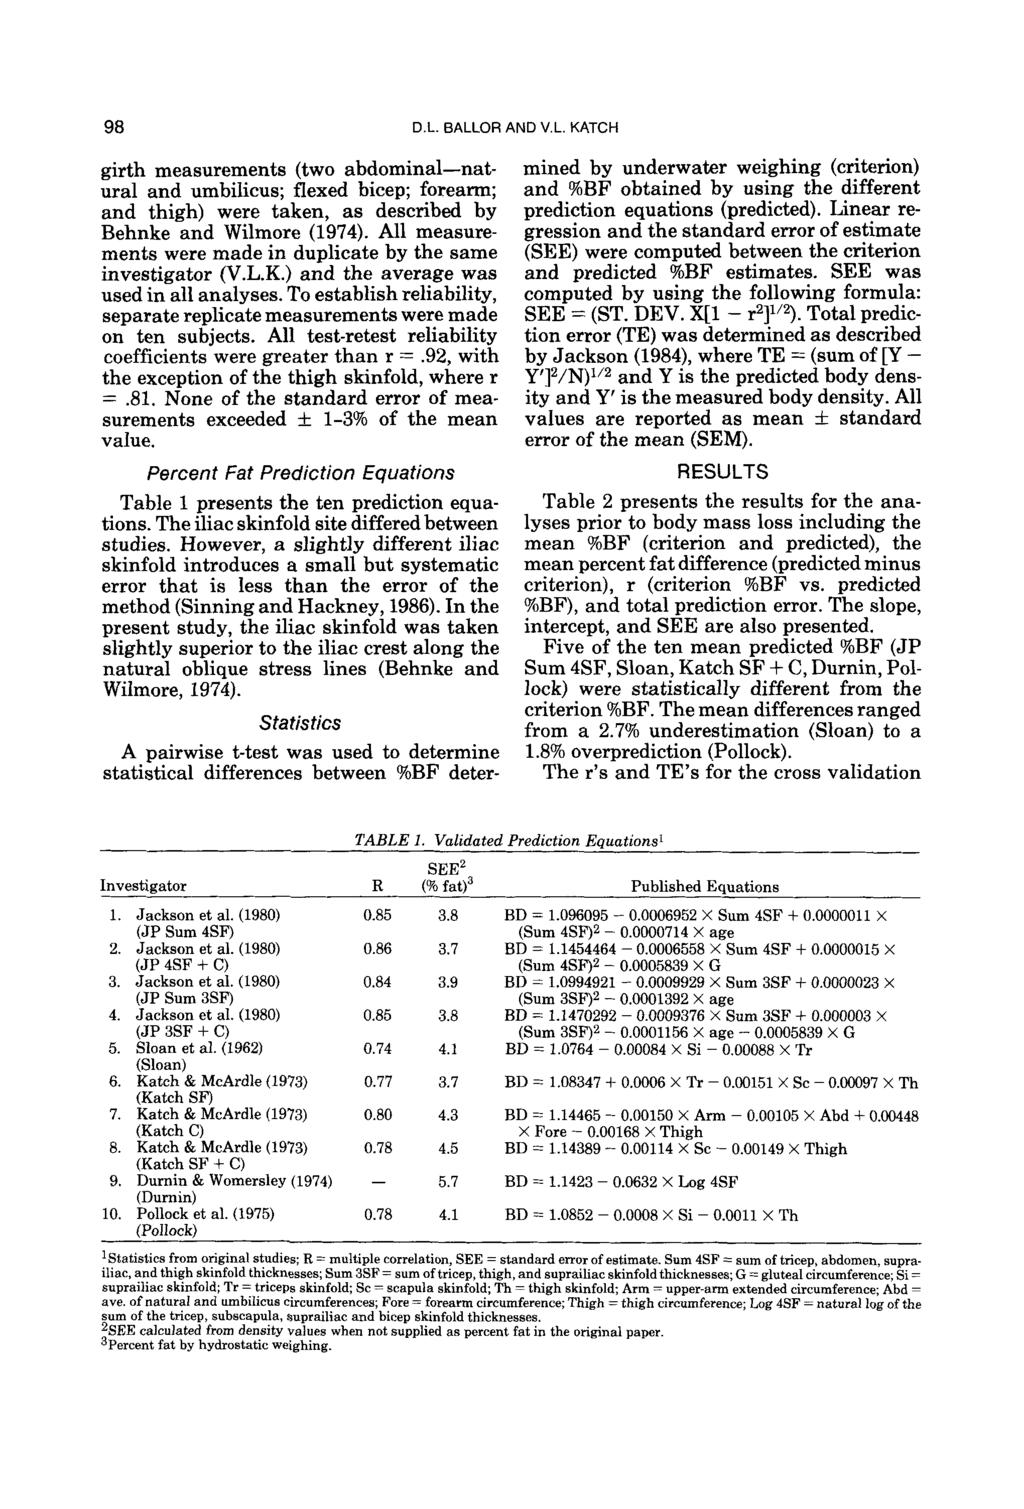 98 D.L. BALLOR AND V.L. KATCH girth measurements (two abdominal-natural and umbilicus; flexed bicep; forearm; and thigh) were taken, as described by Behnke and Wilmore (1974).